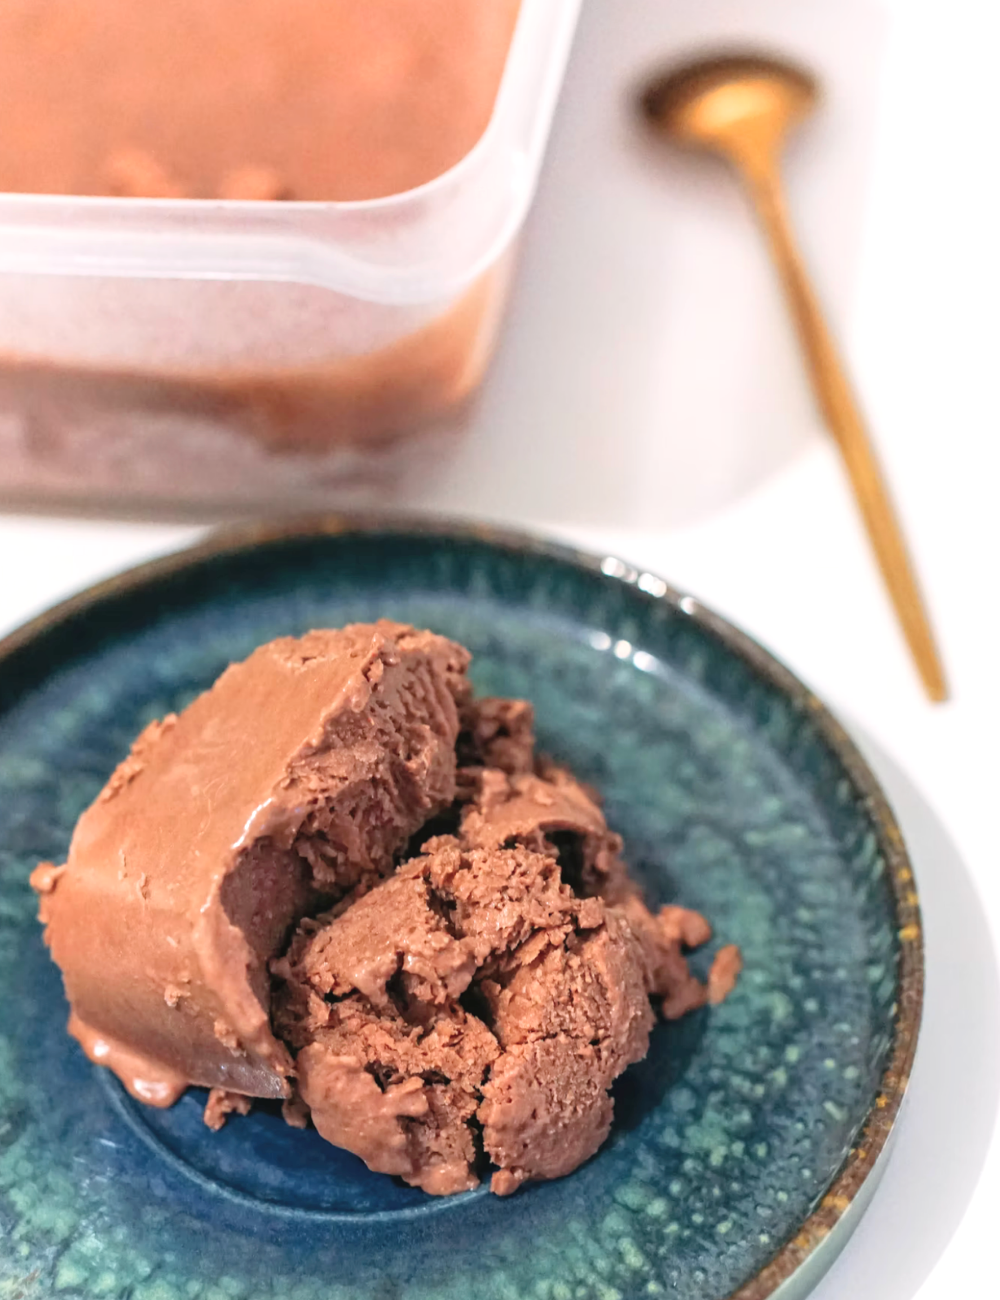 vegan blender ice cream with protein powder healthy high protein vegan desserts make dairy free ice cream in a blender with frozen bananas how to make ice cream vegan at home